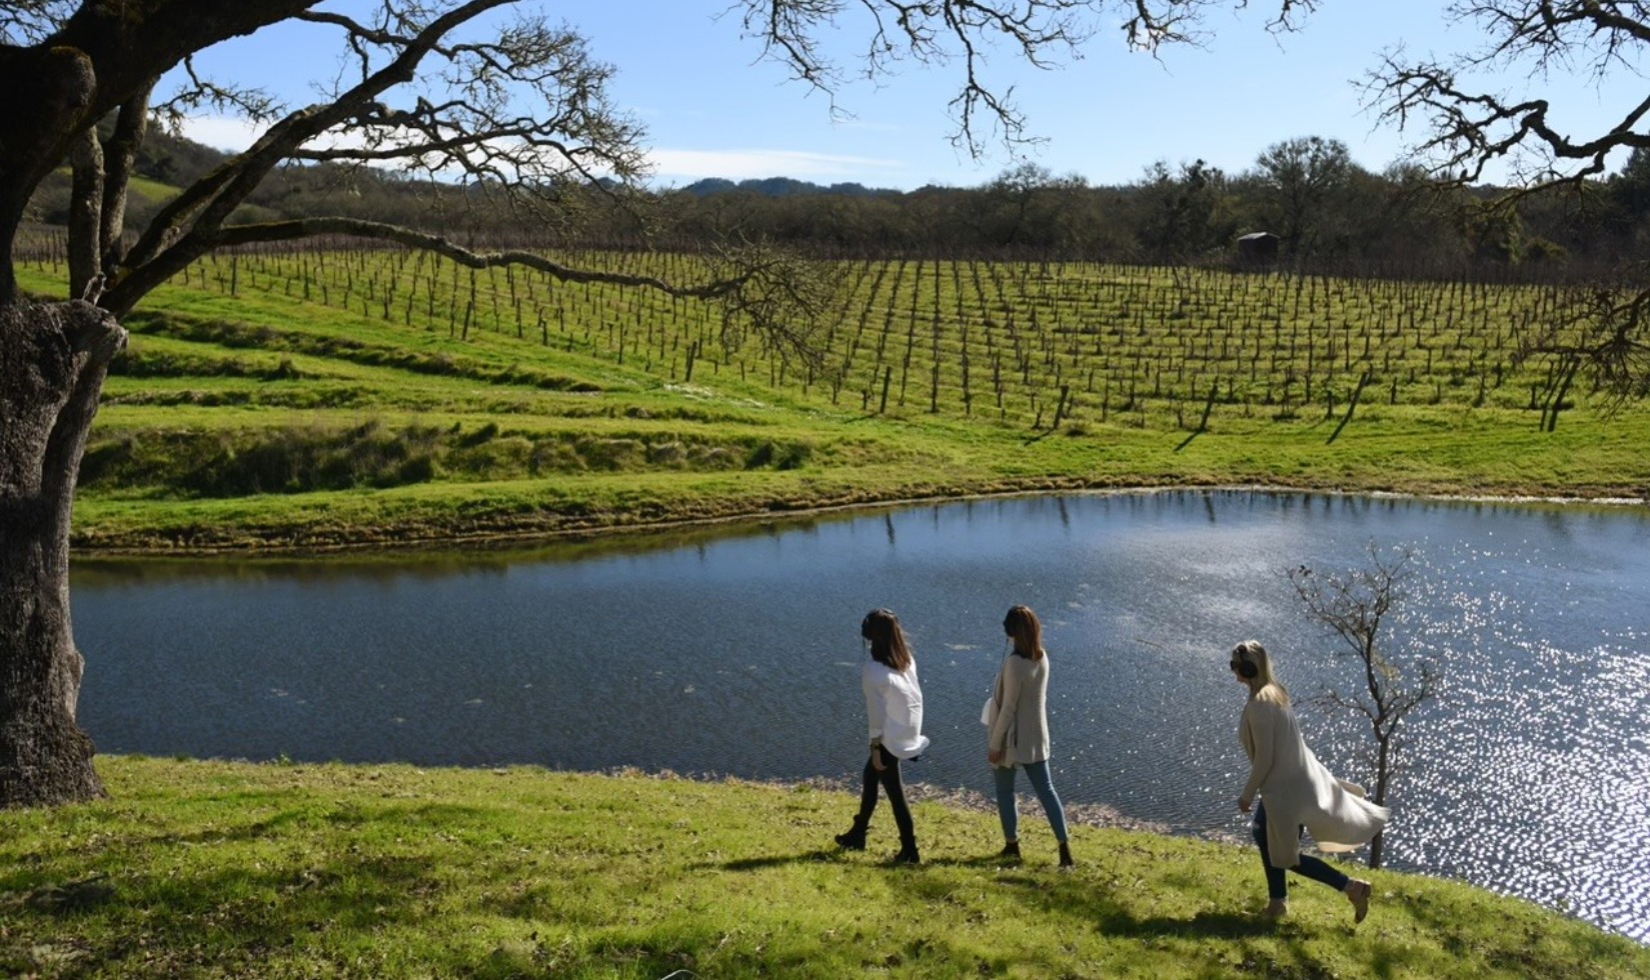 Group walks around lake in vineyard with headphones during a sound immersion experience